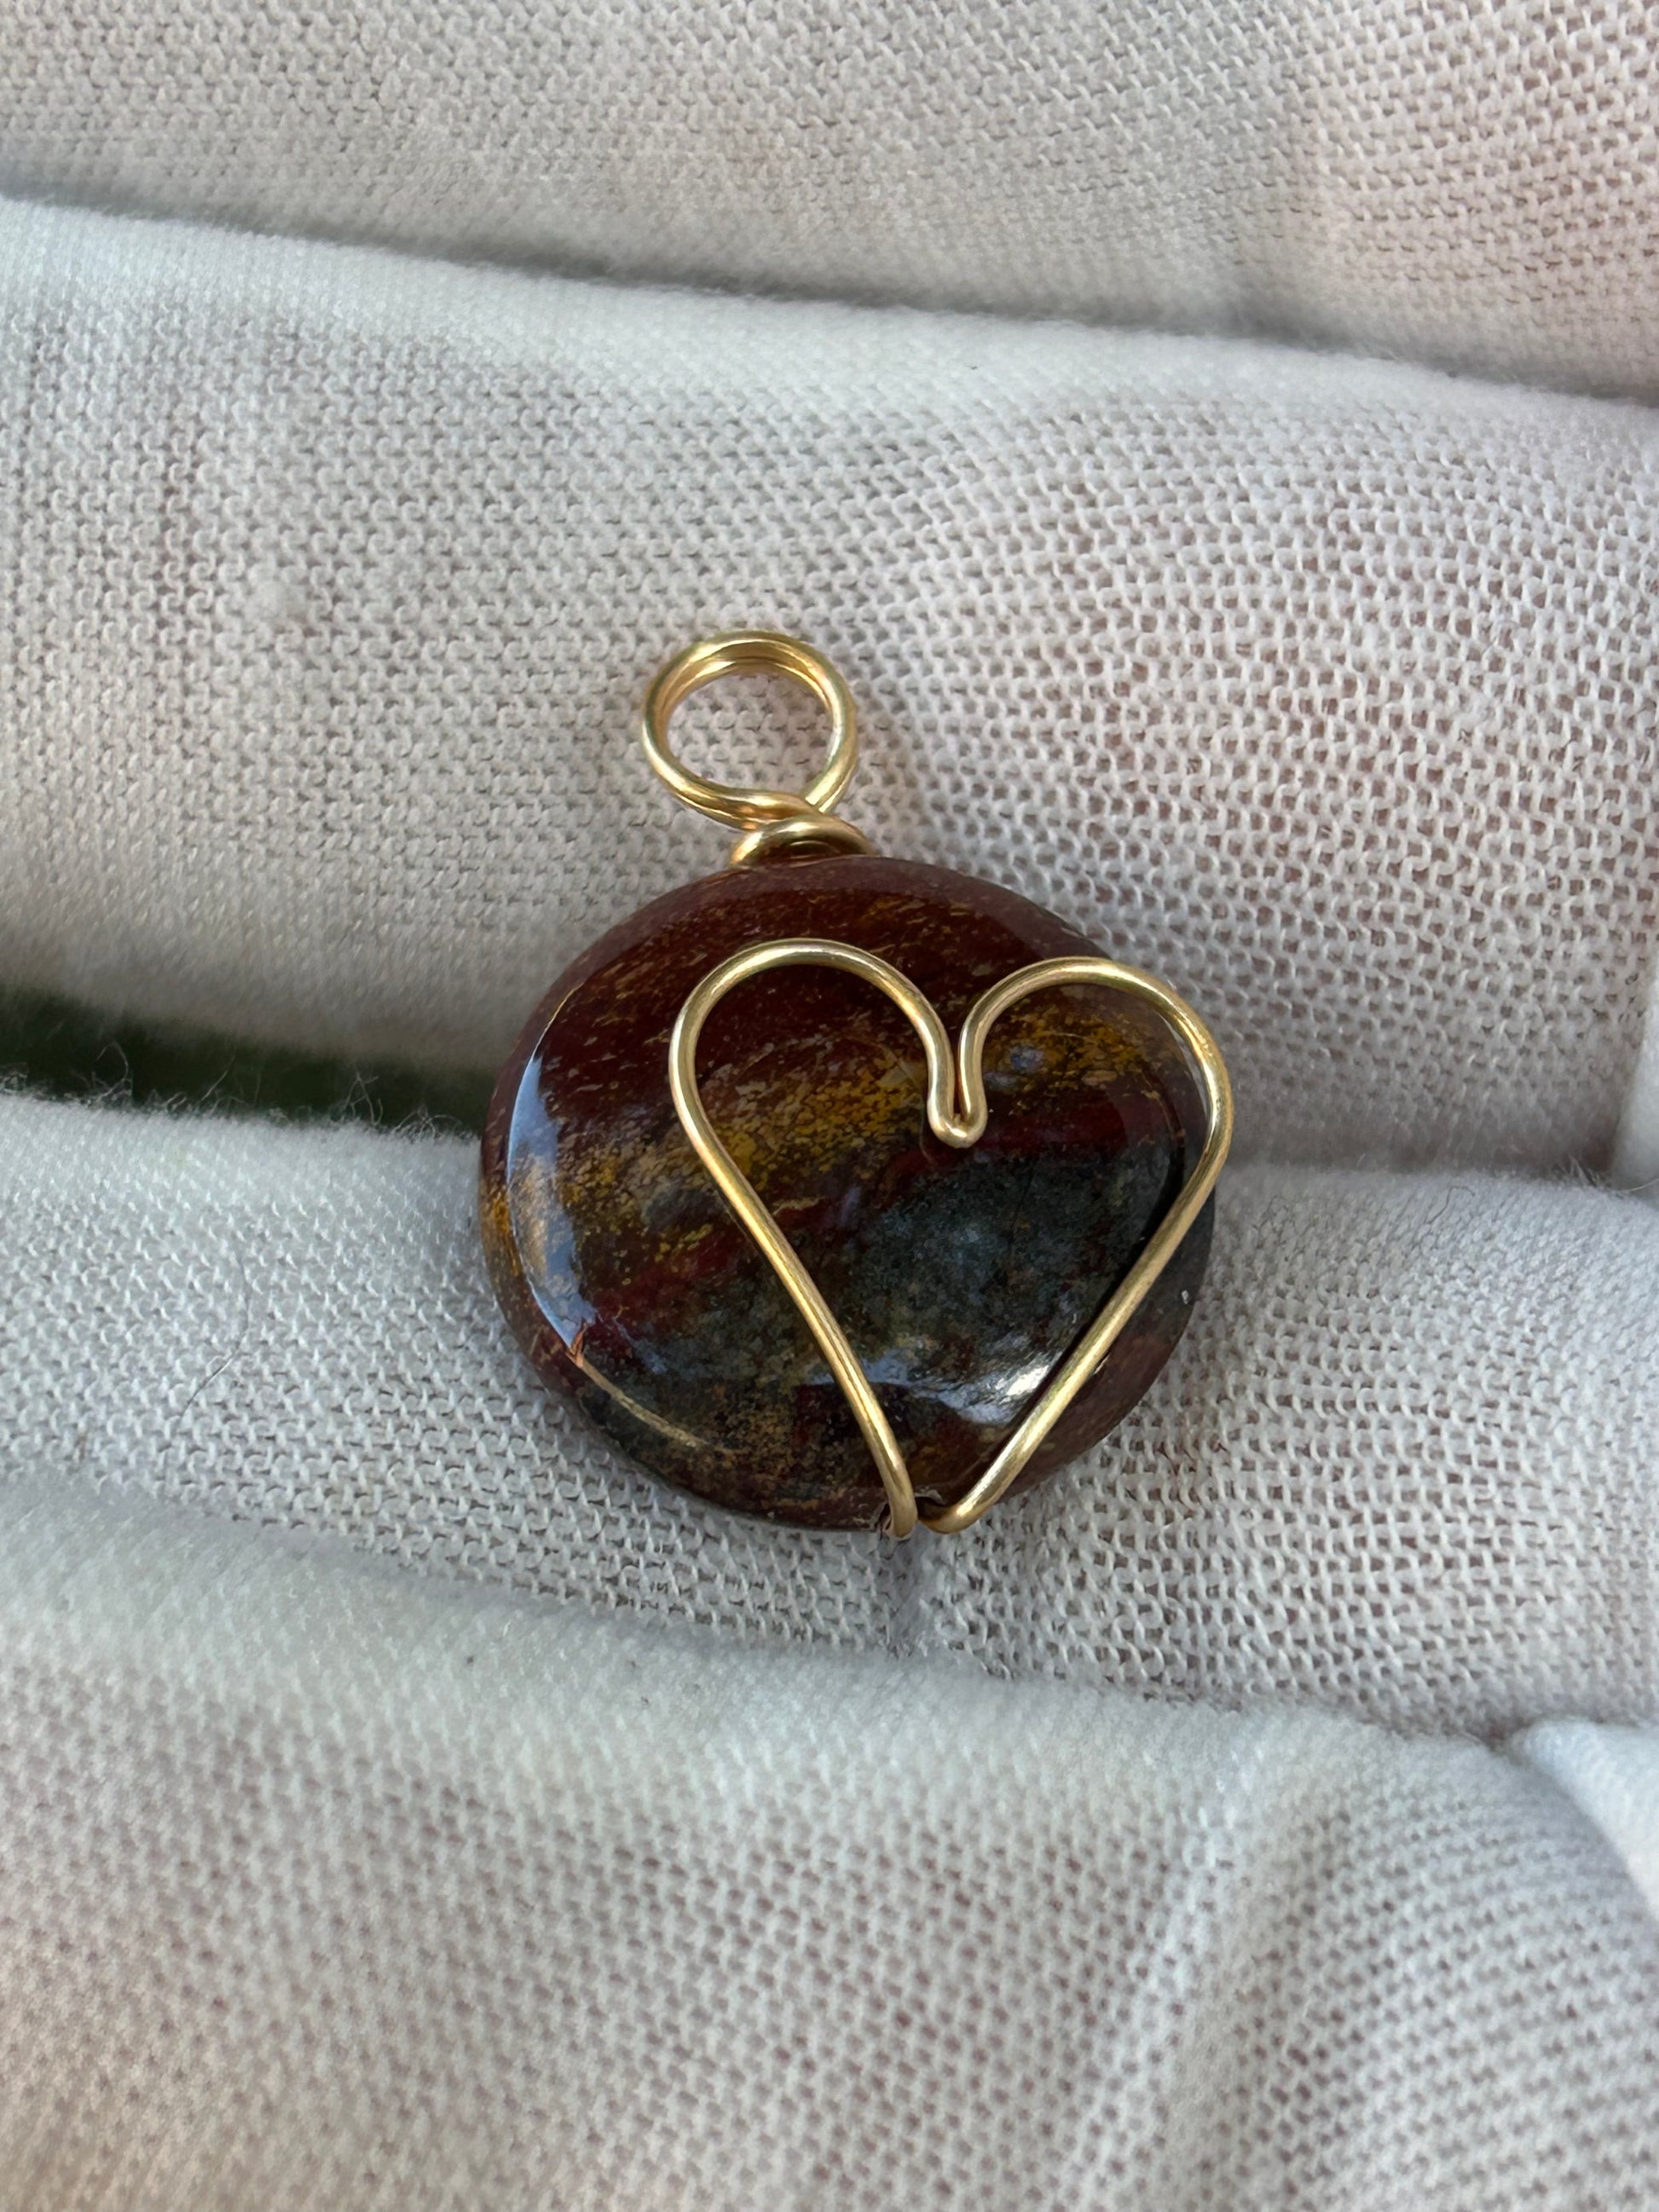 Small round pollished tigers eye pendant with gold wrapped heart